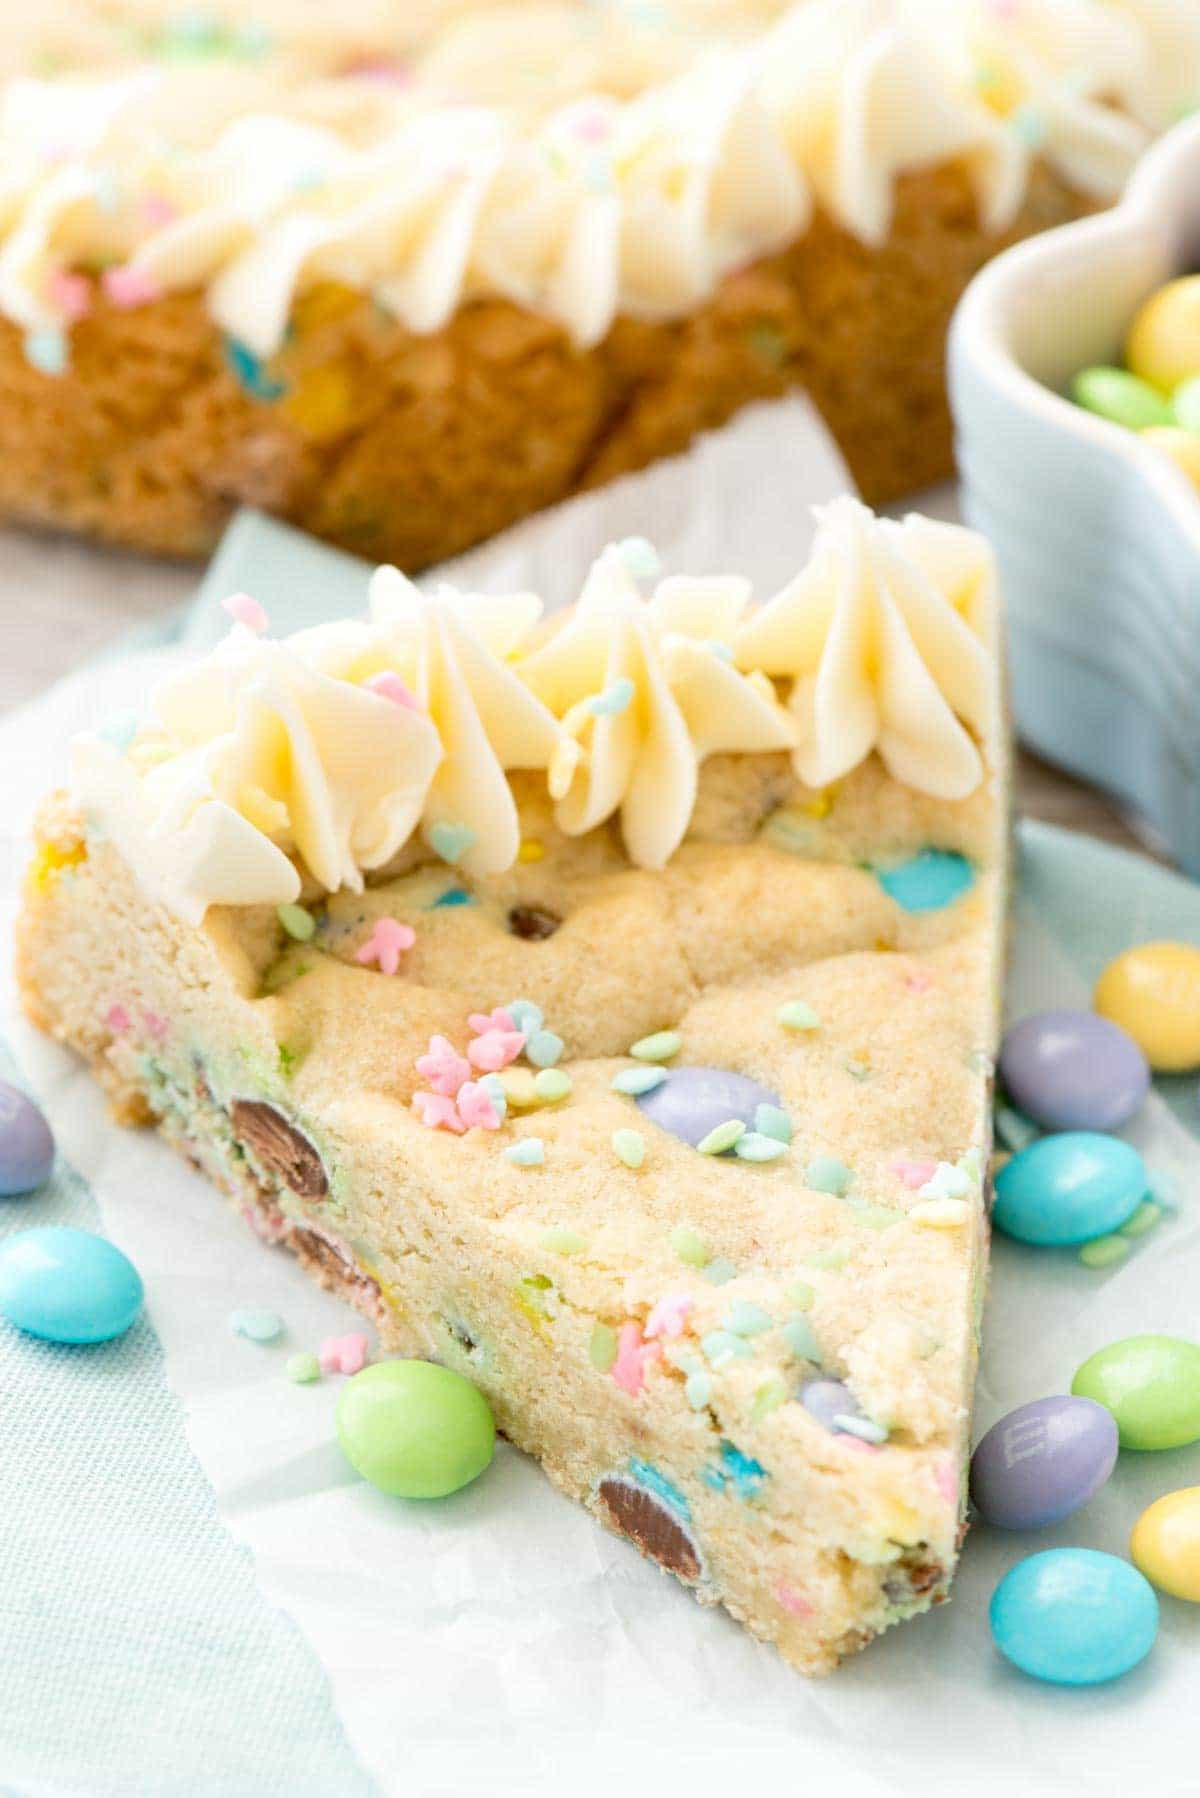 Easy Easter Desserts Recipes with Pictures Elegant 25 Easter Recipes Easter Desserts the 36th Avenue